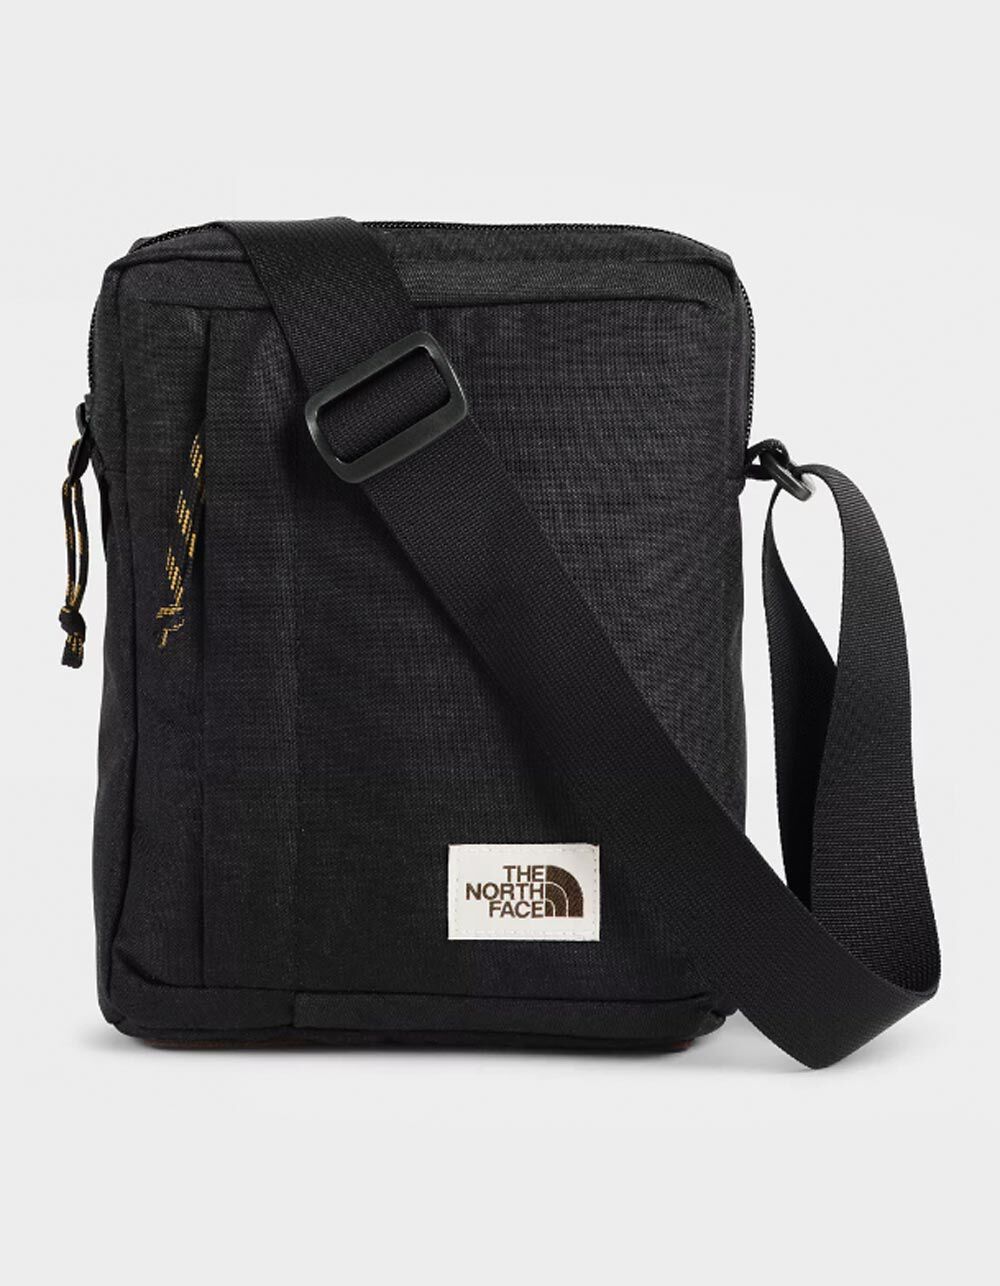 THE NORTH FACE Crossbody Bag image number 1